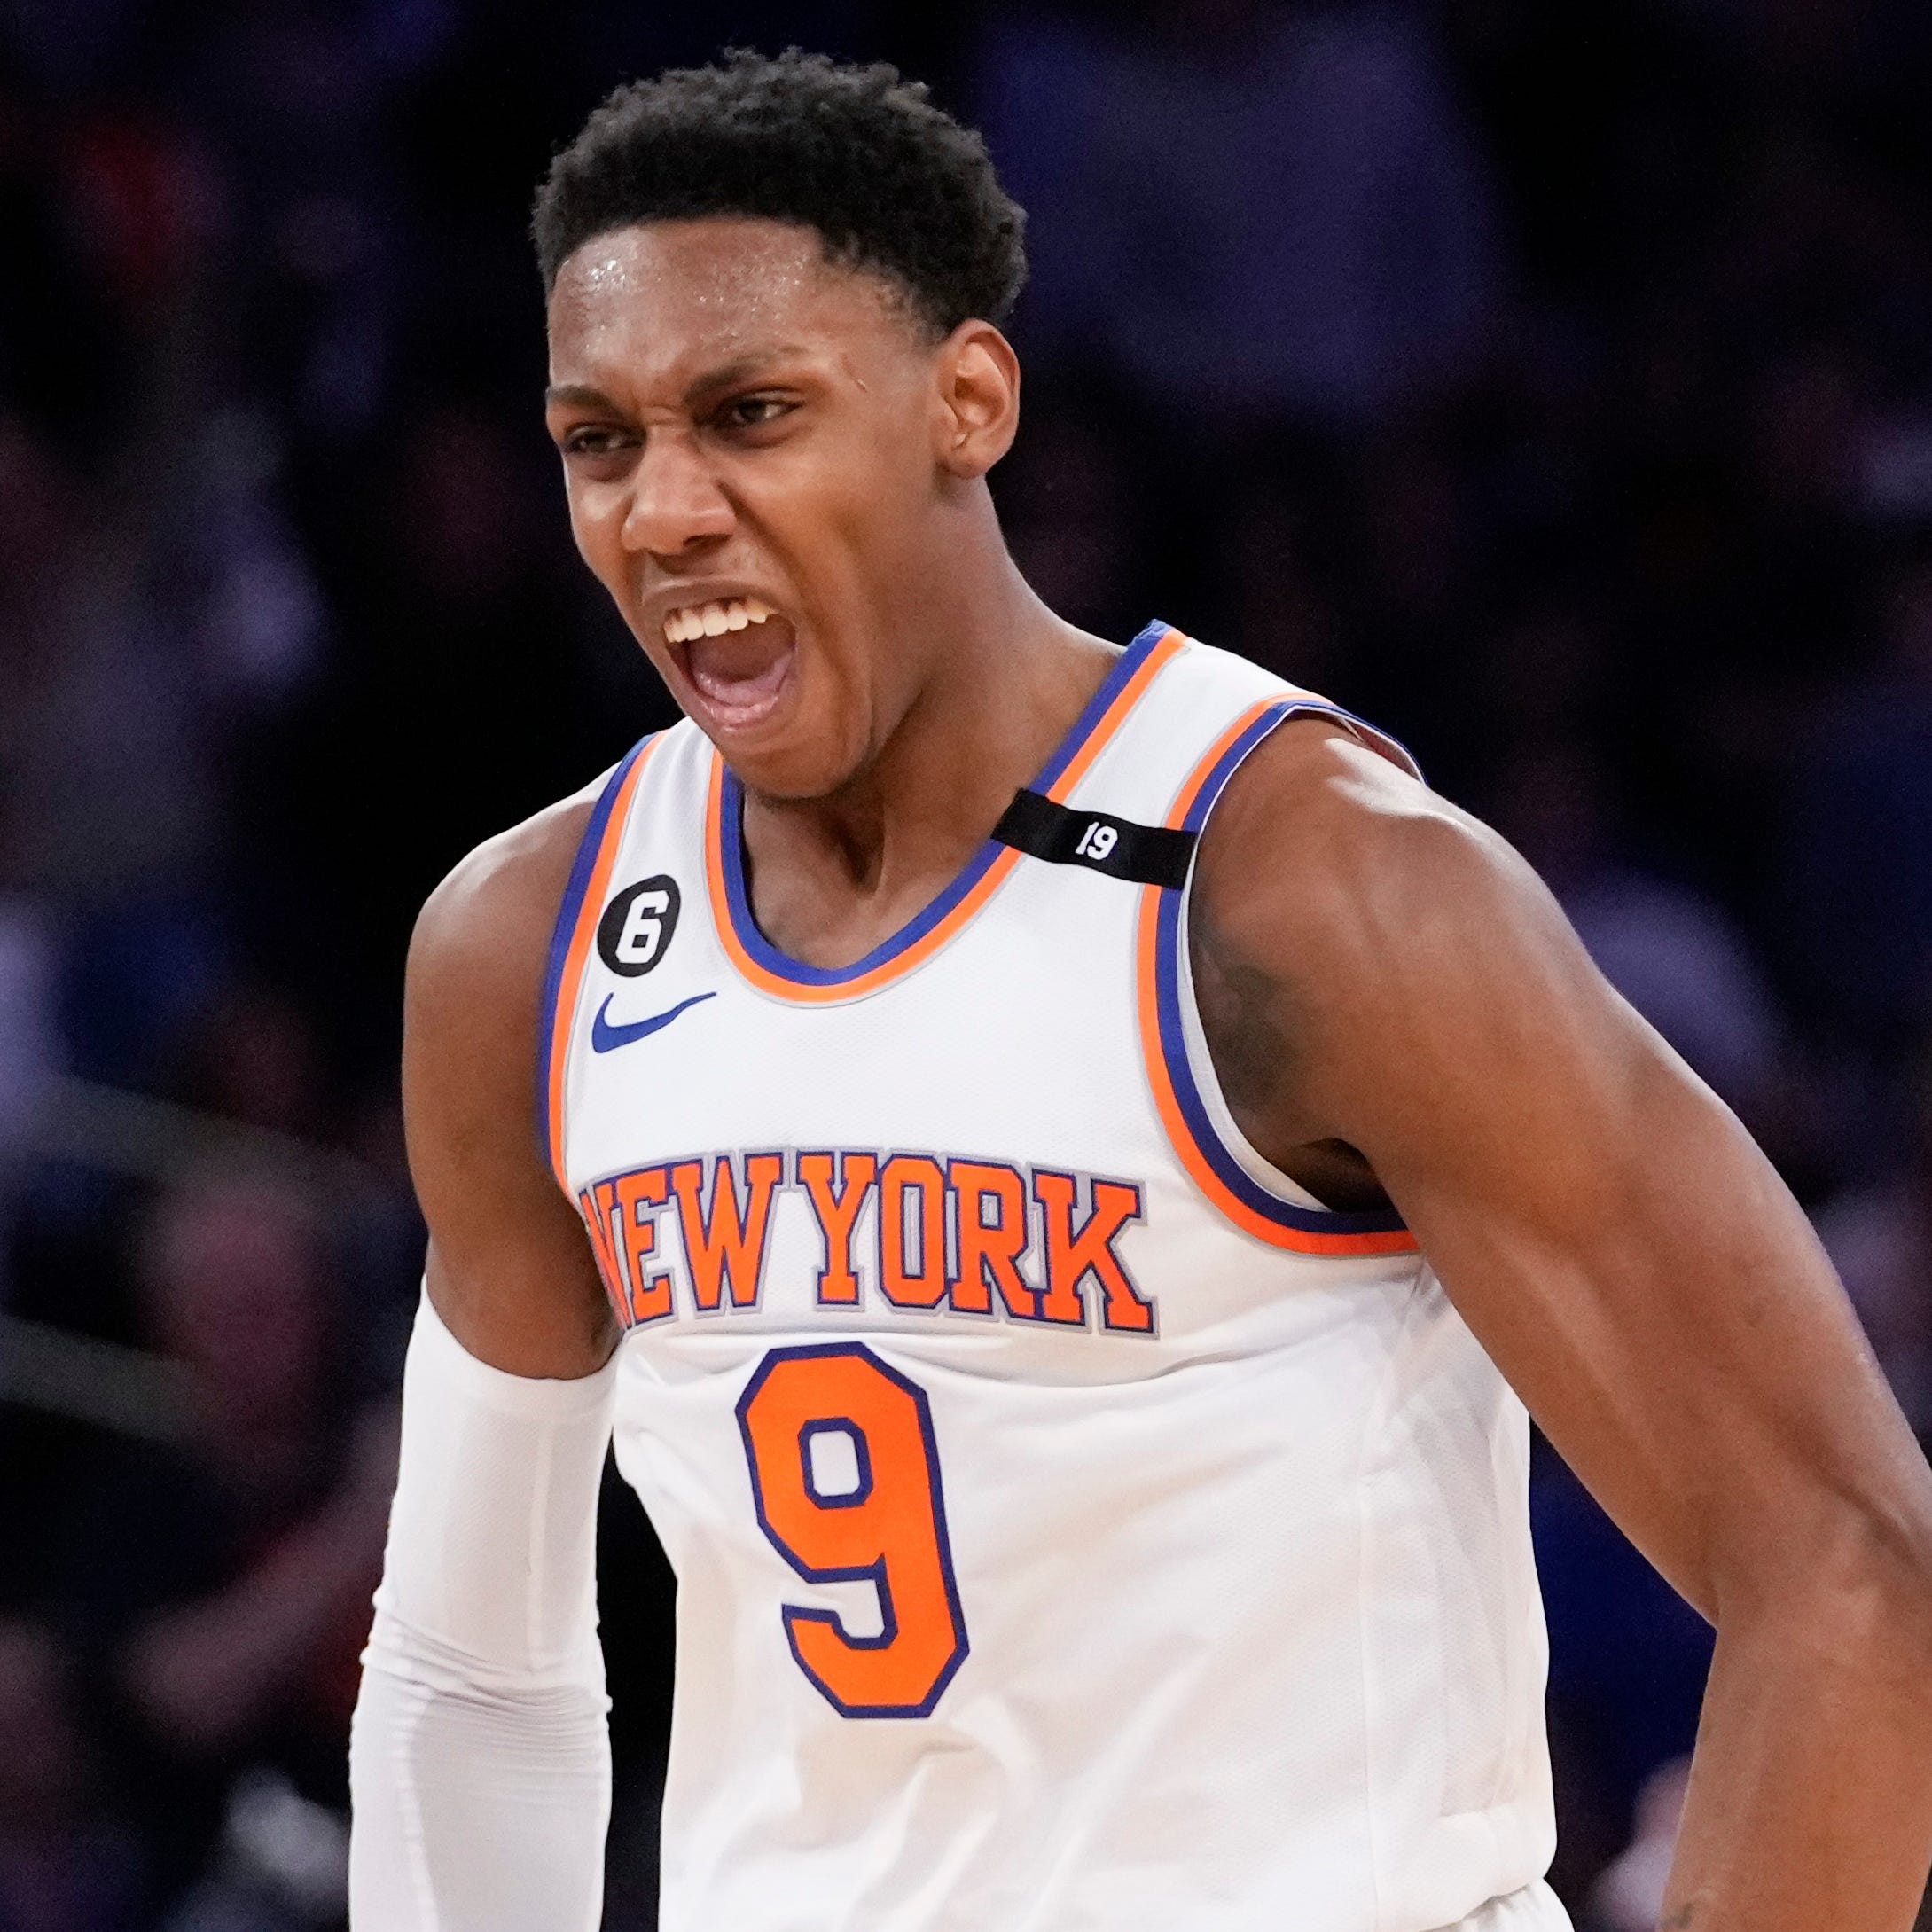 RJ Barrett reacts after scoring against the Cleveland Cavaliers.